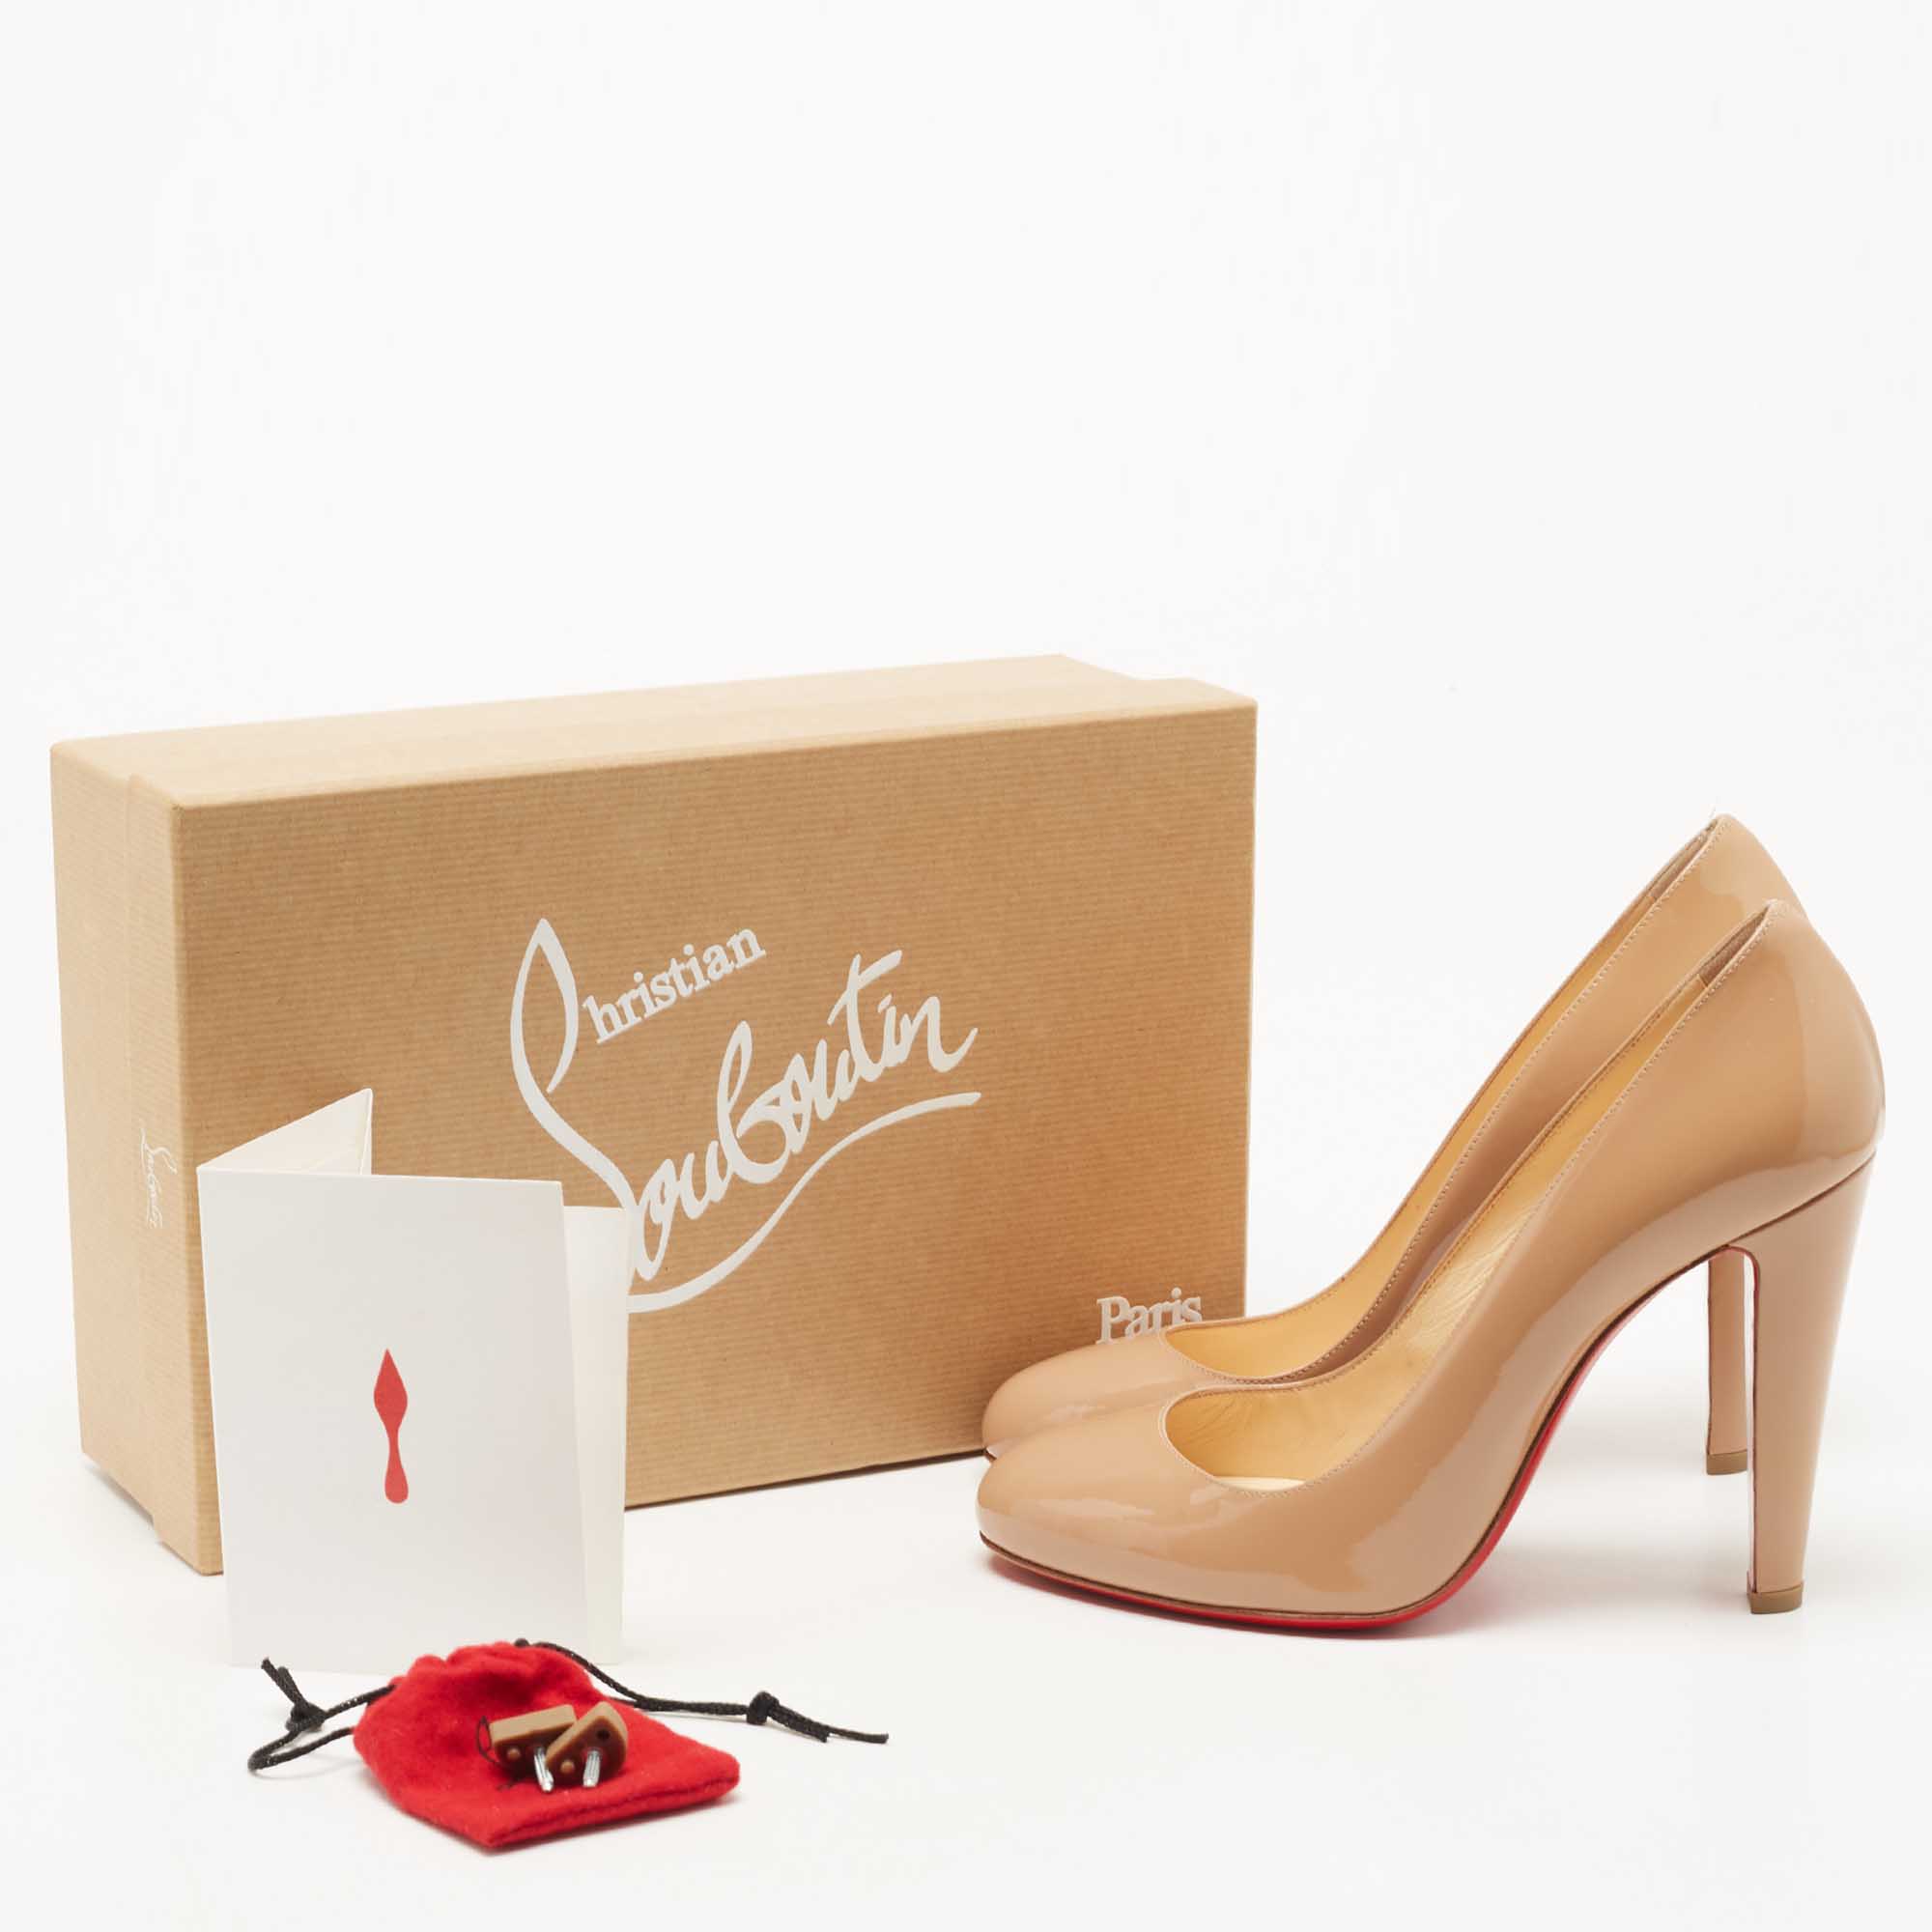 Christian Louboutin Beige Patent Leather FiFifa Round Toe Pumps Size 39